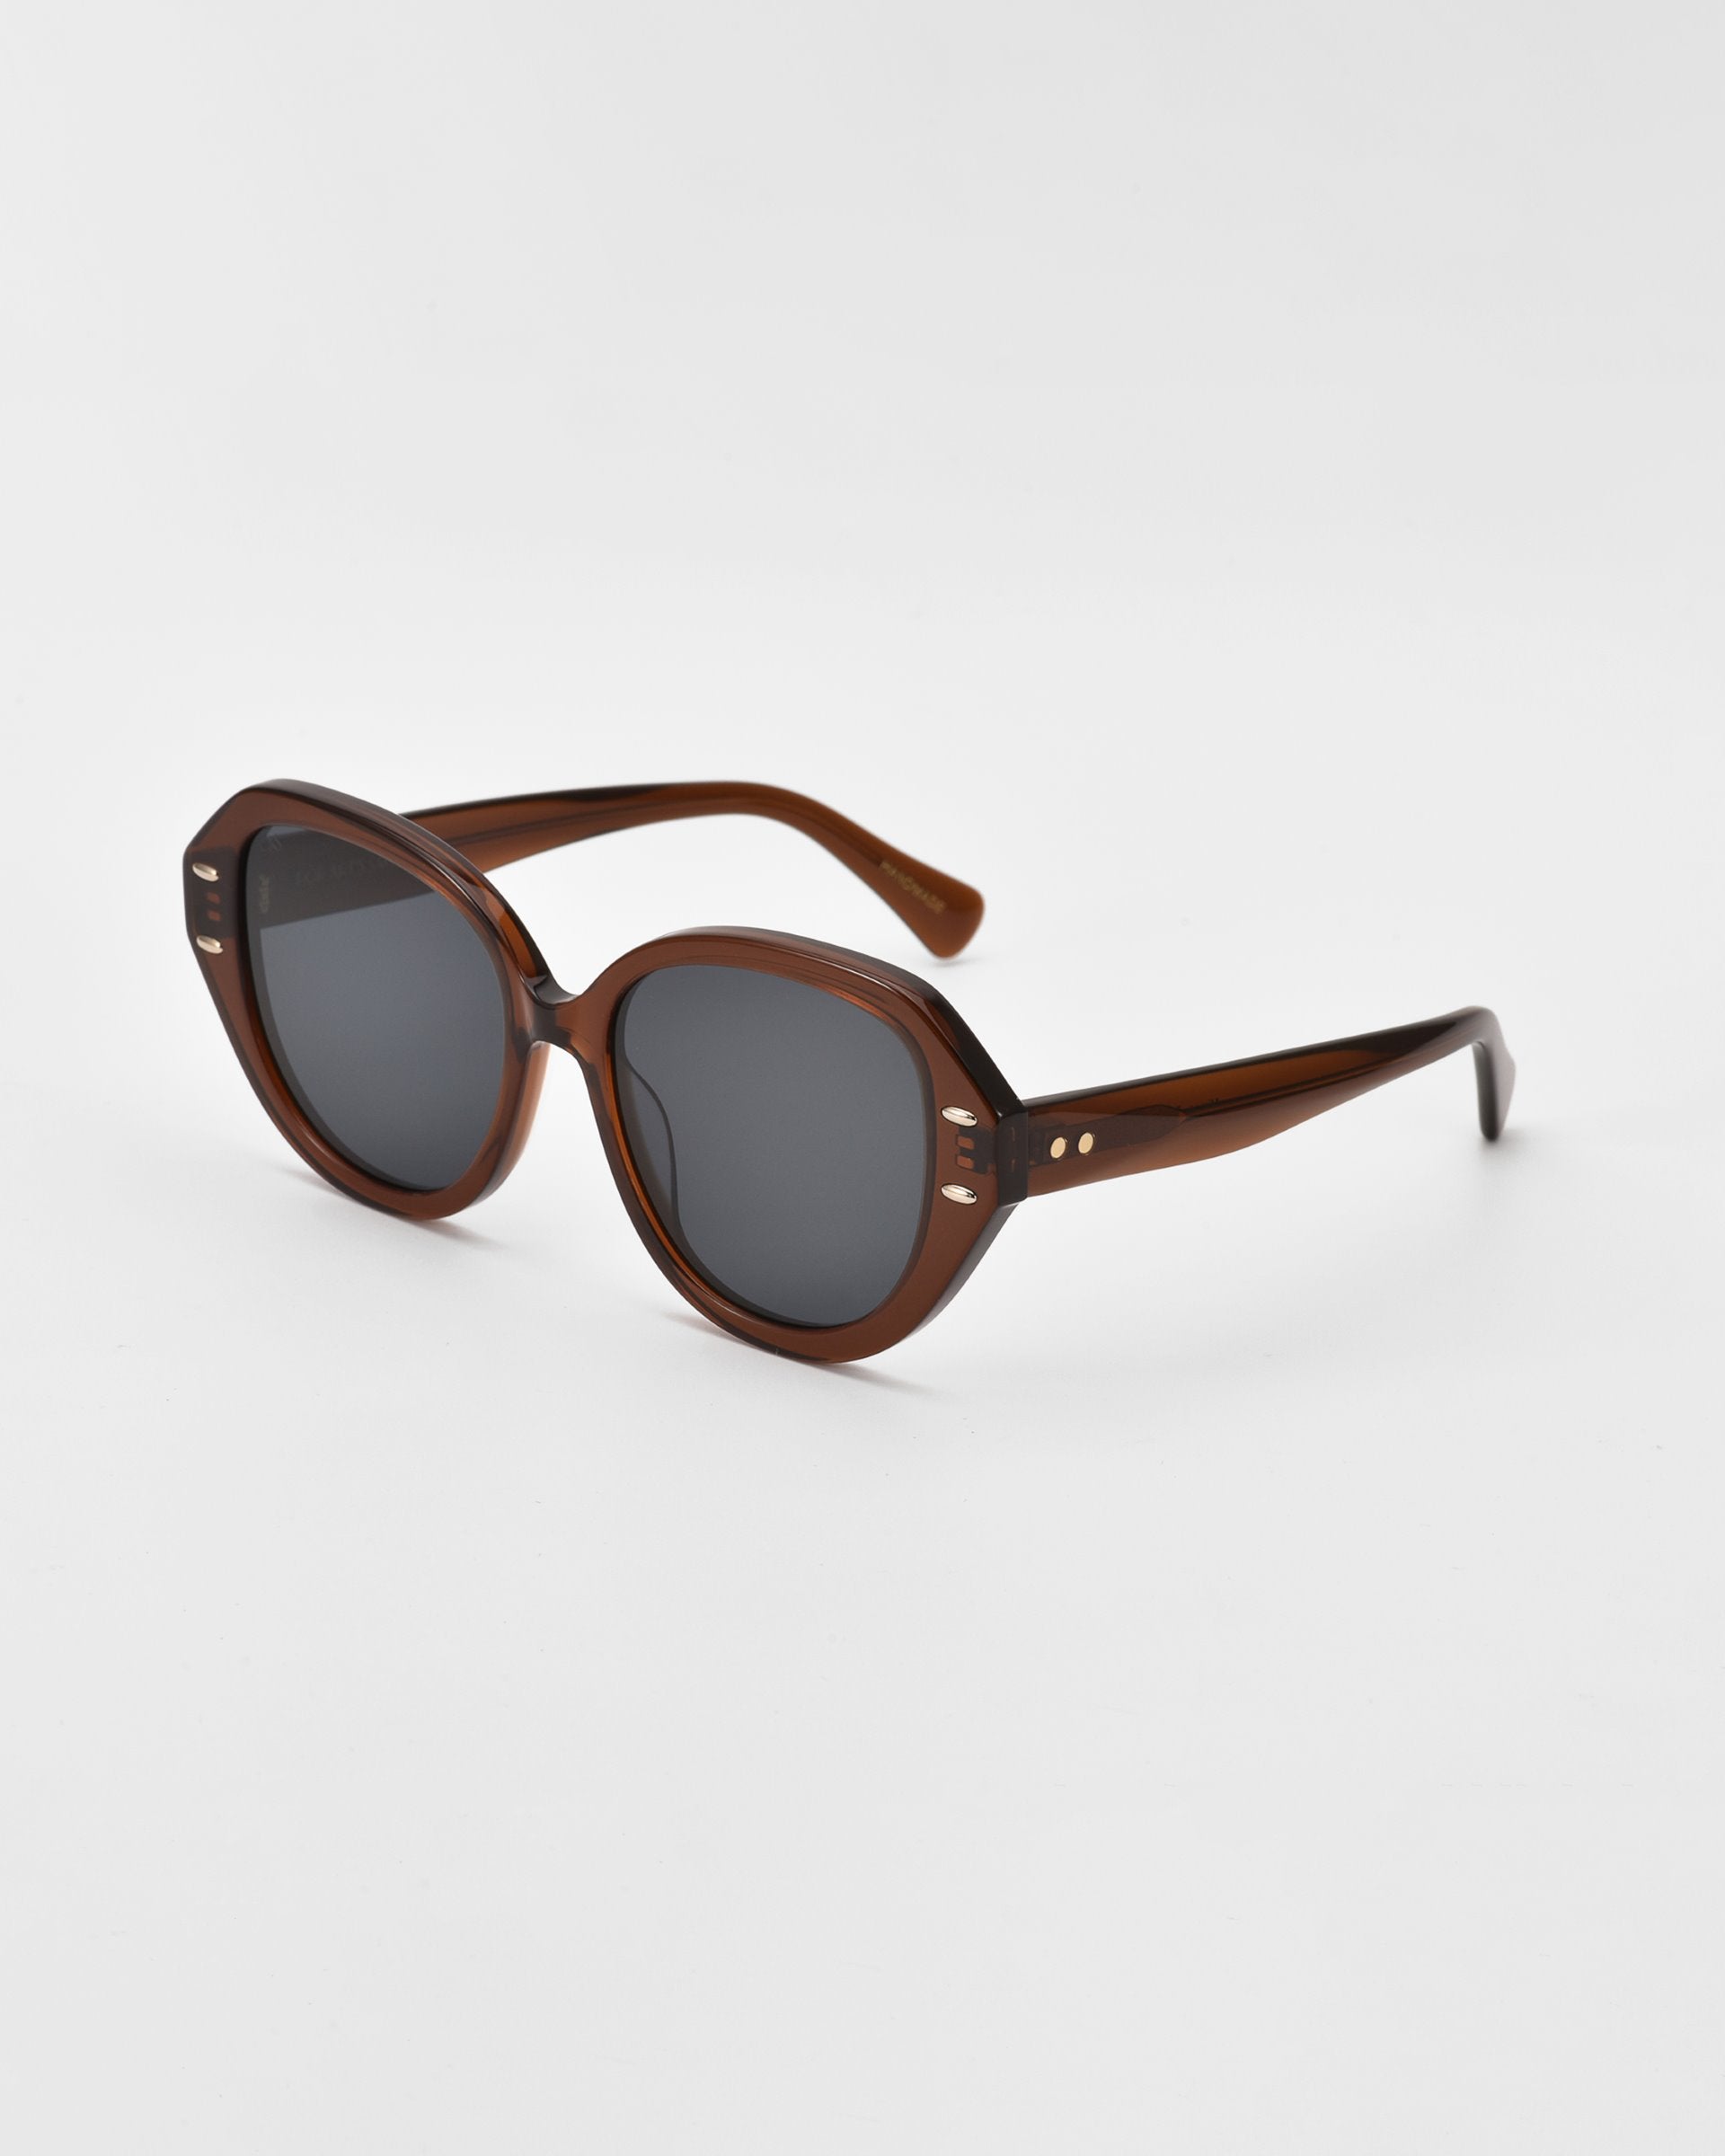 A pair of stylish dark brown Mirage cat-eye sunglasses with round frames and dark lenses, resting on a white surface. The temples feature small oval gold and silver-tone metal accents for added detail. Made from plant-based acetate, the For Art&#39;s Sake® Mirage sunglasses boast a classic yet modern design.